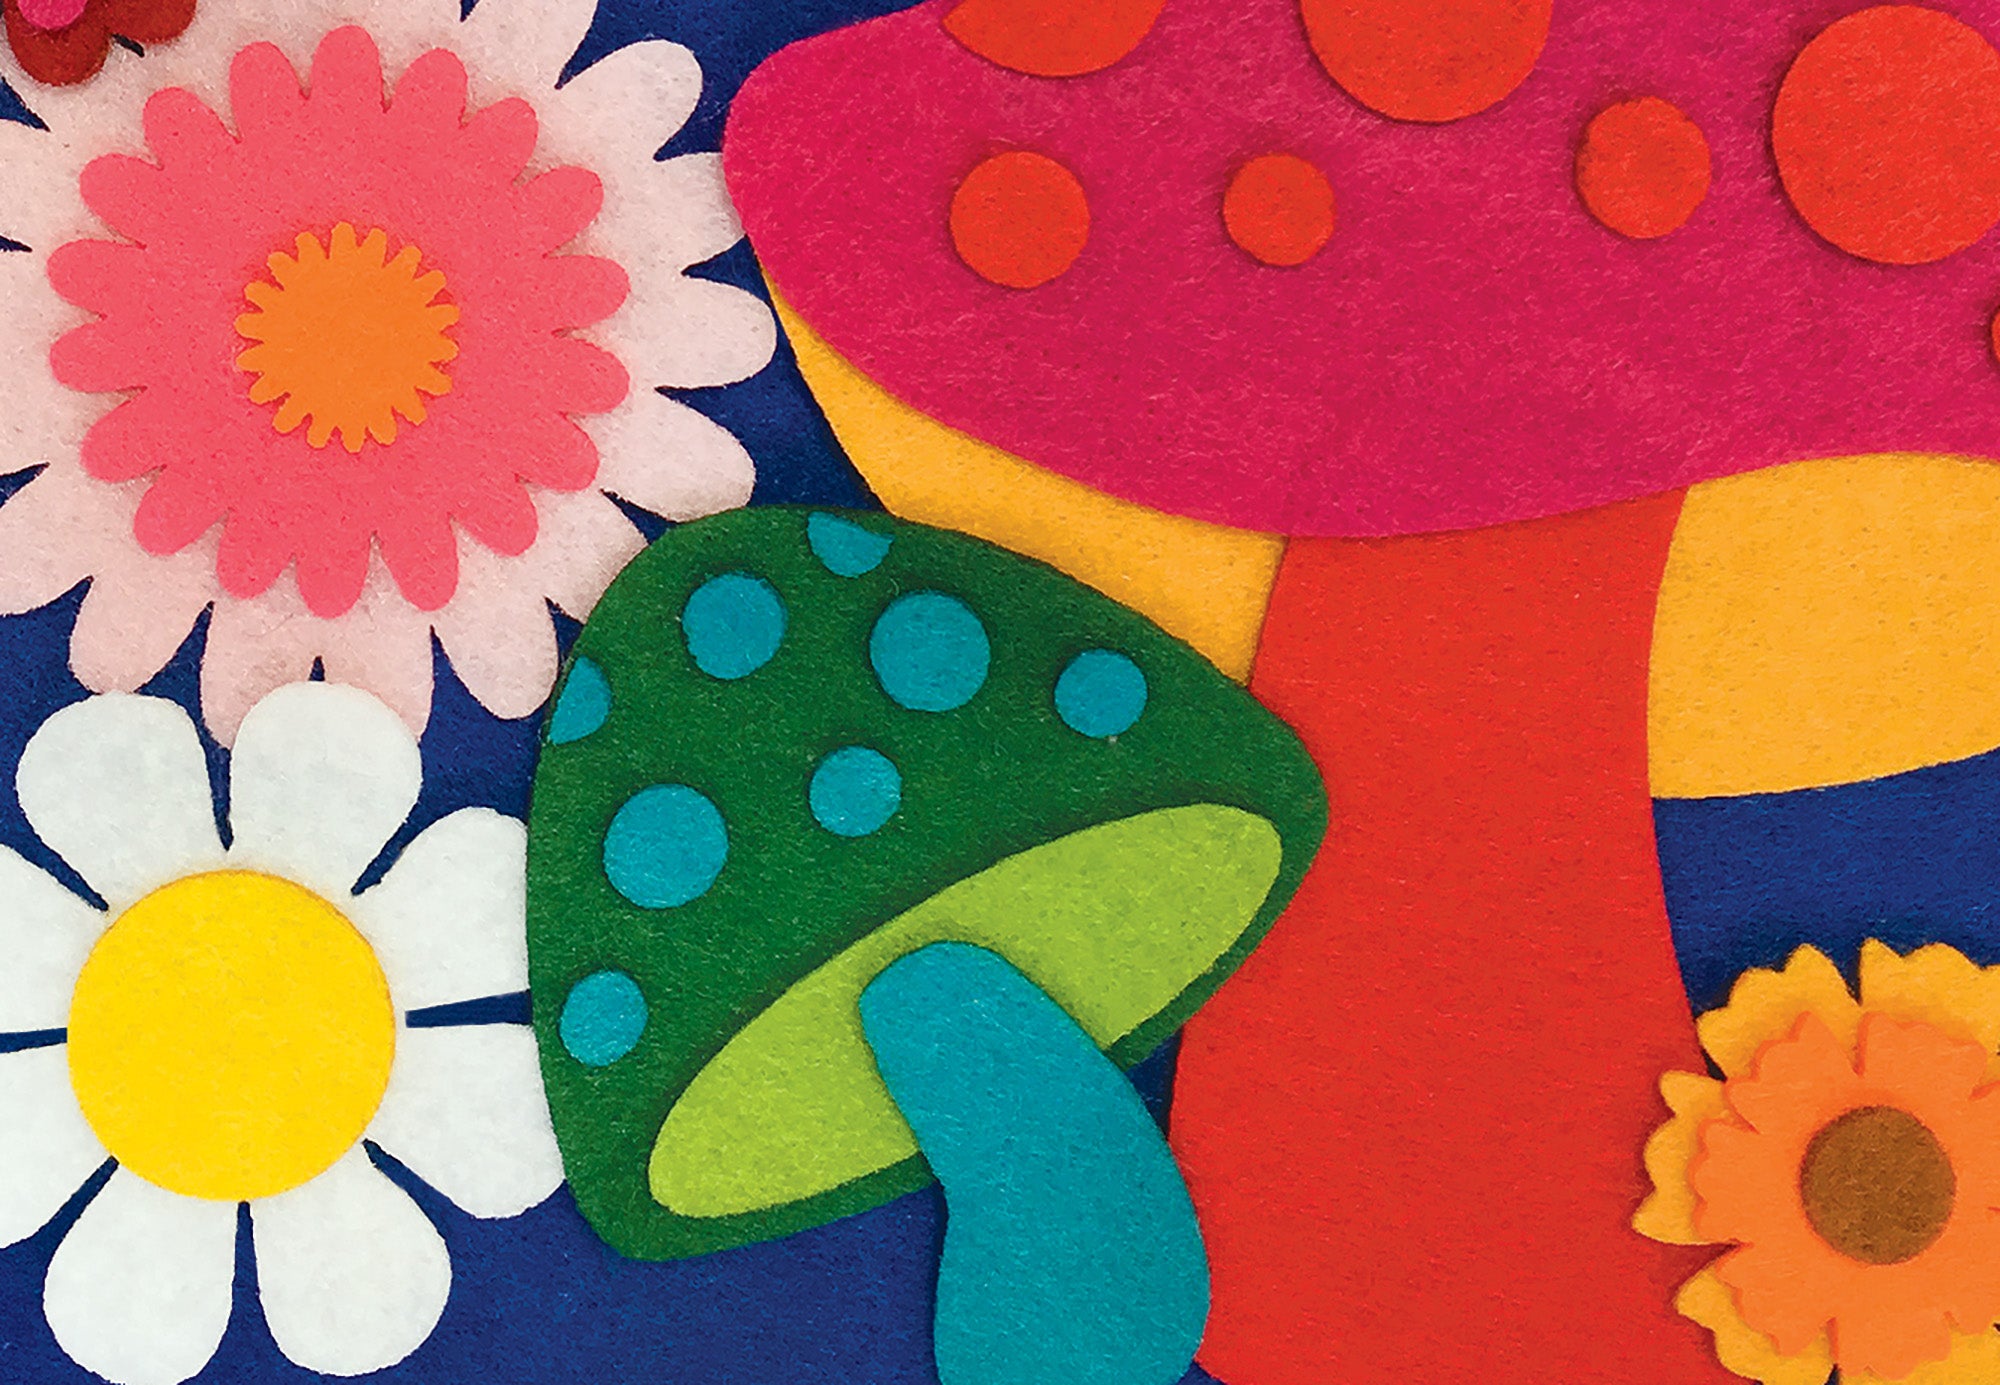 Close up detail of an A3 art print of a felt collage design. The design features felt flowers and mushrooms and the words Dream Big, on a blue felt background. The print is framed on a magenta background.